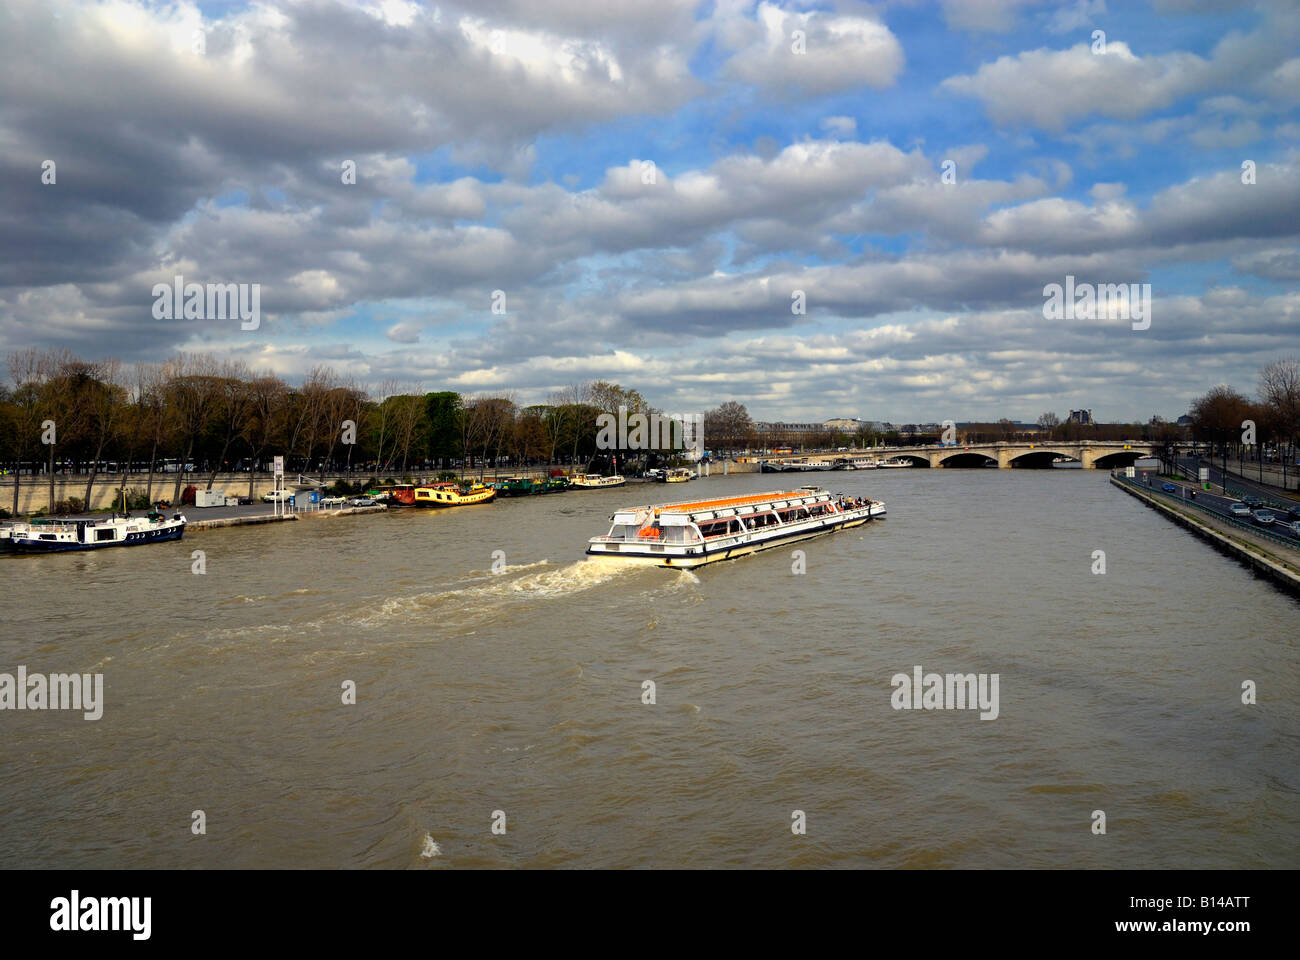 The river Seine in Paris from the Pont Alexandre III looking towards the Pont de la Concorde. Stock Photo